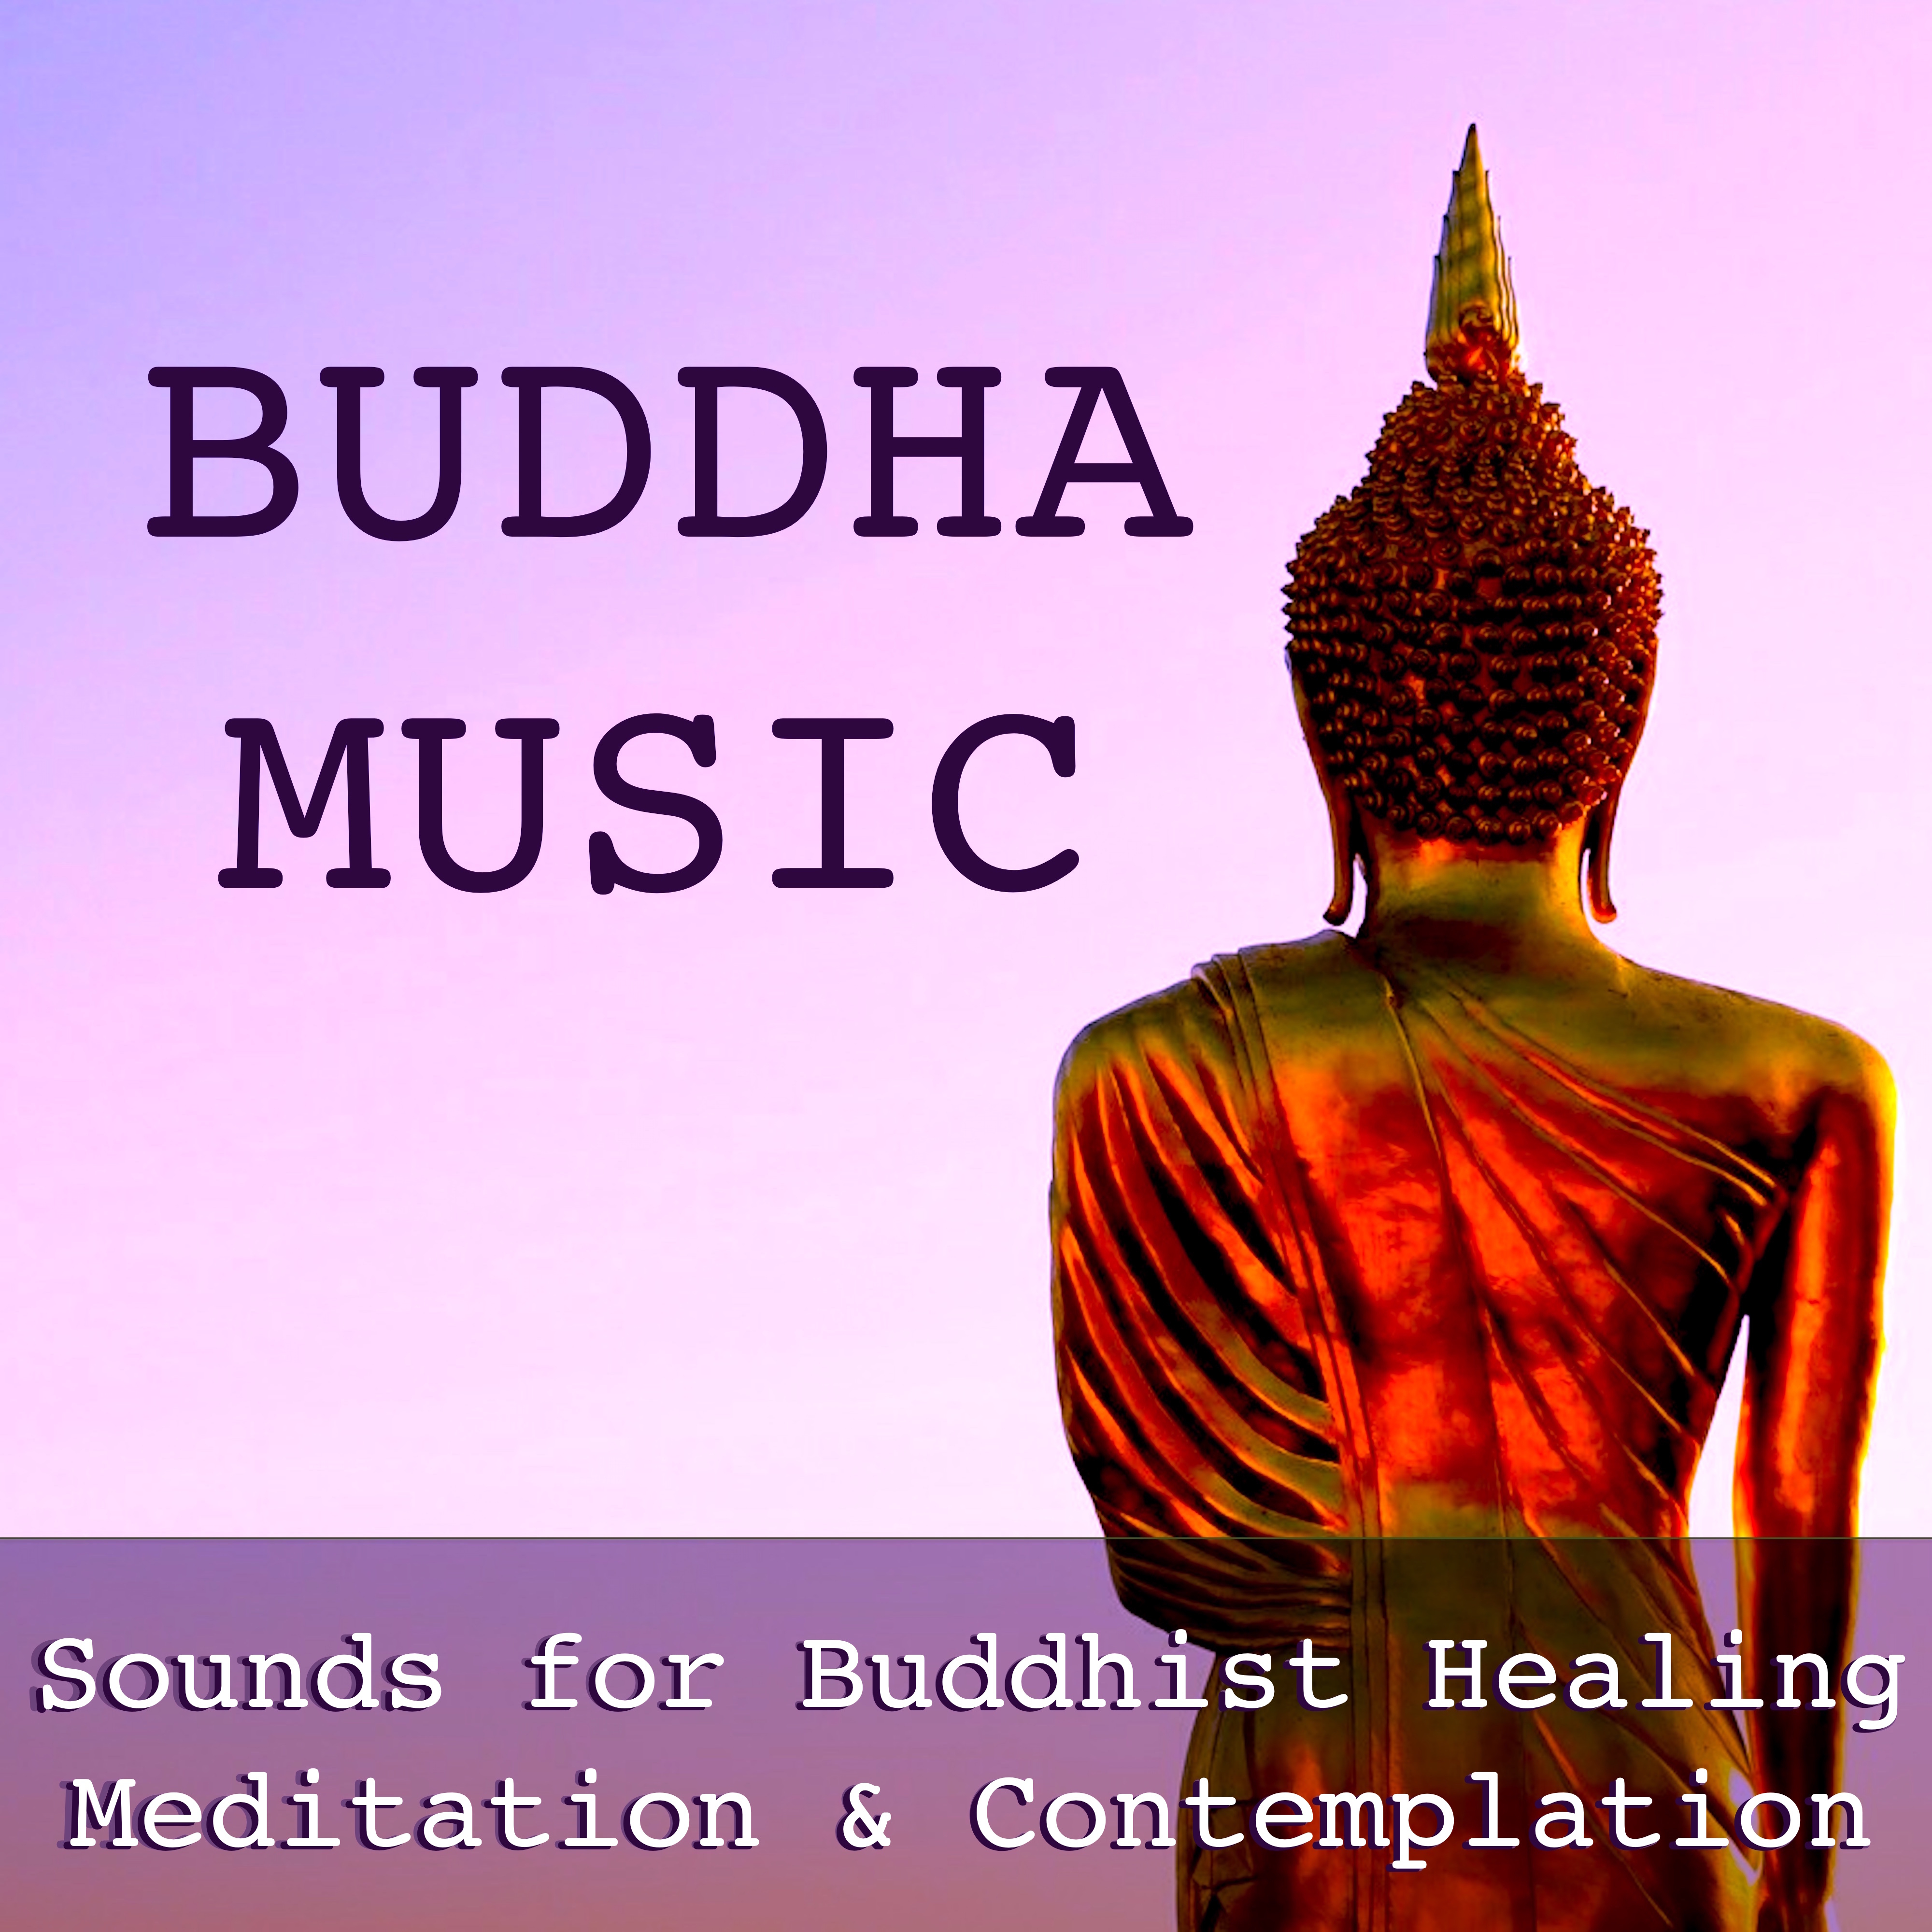 Buddha Music: Sounds for Buddhist Healing Meditation & Contemplation - Soothing Music for Relaxation & Rebirth